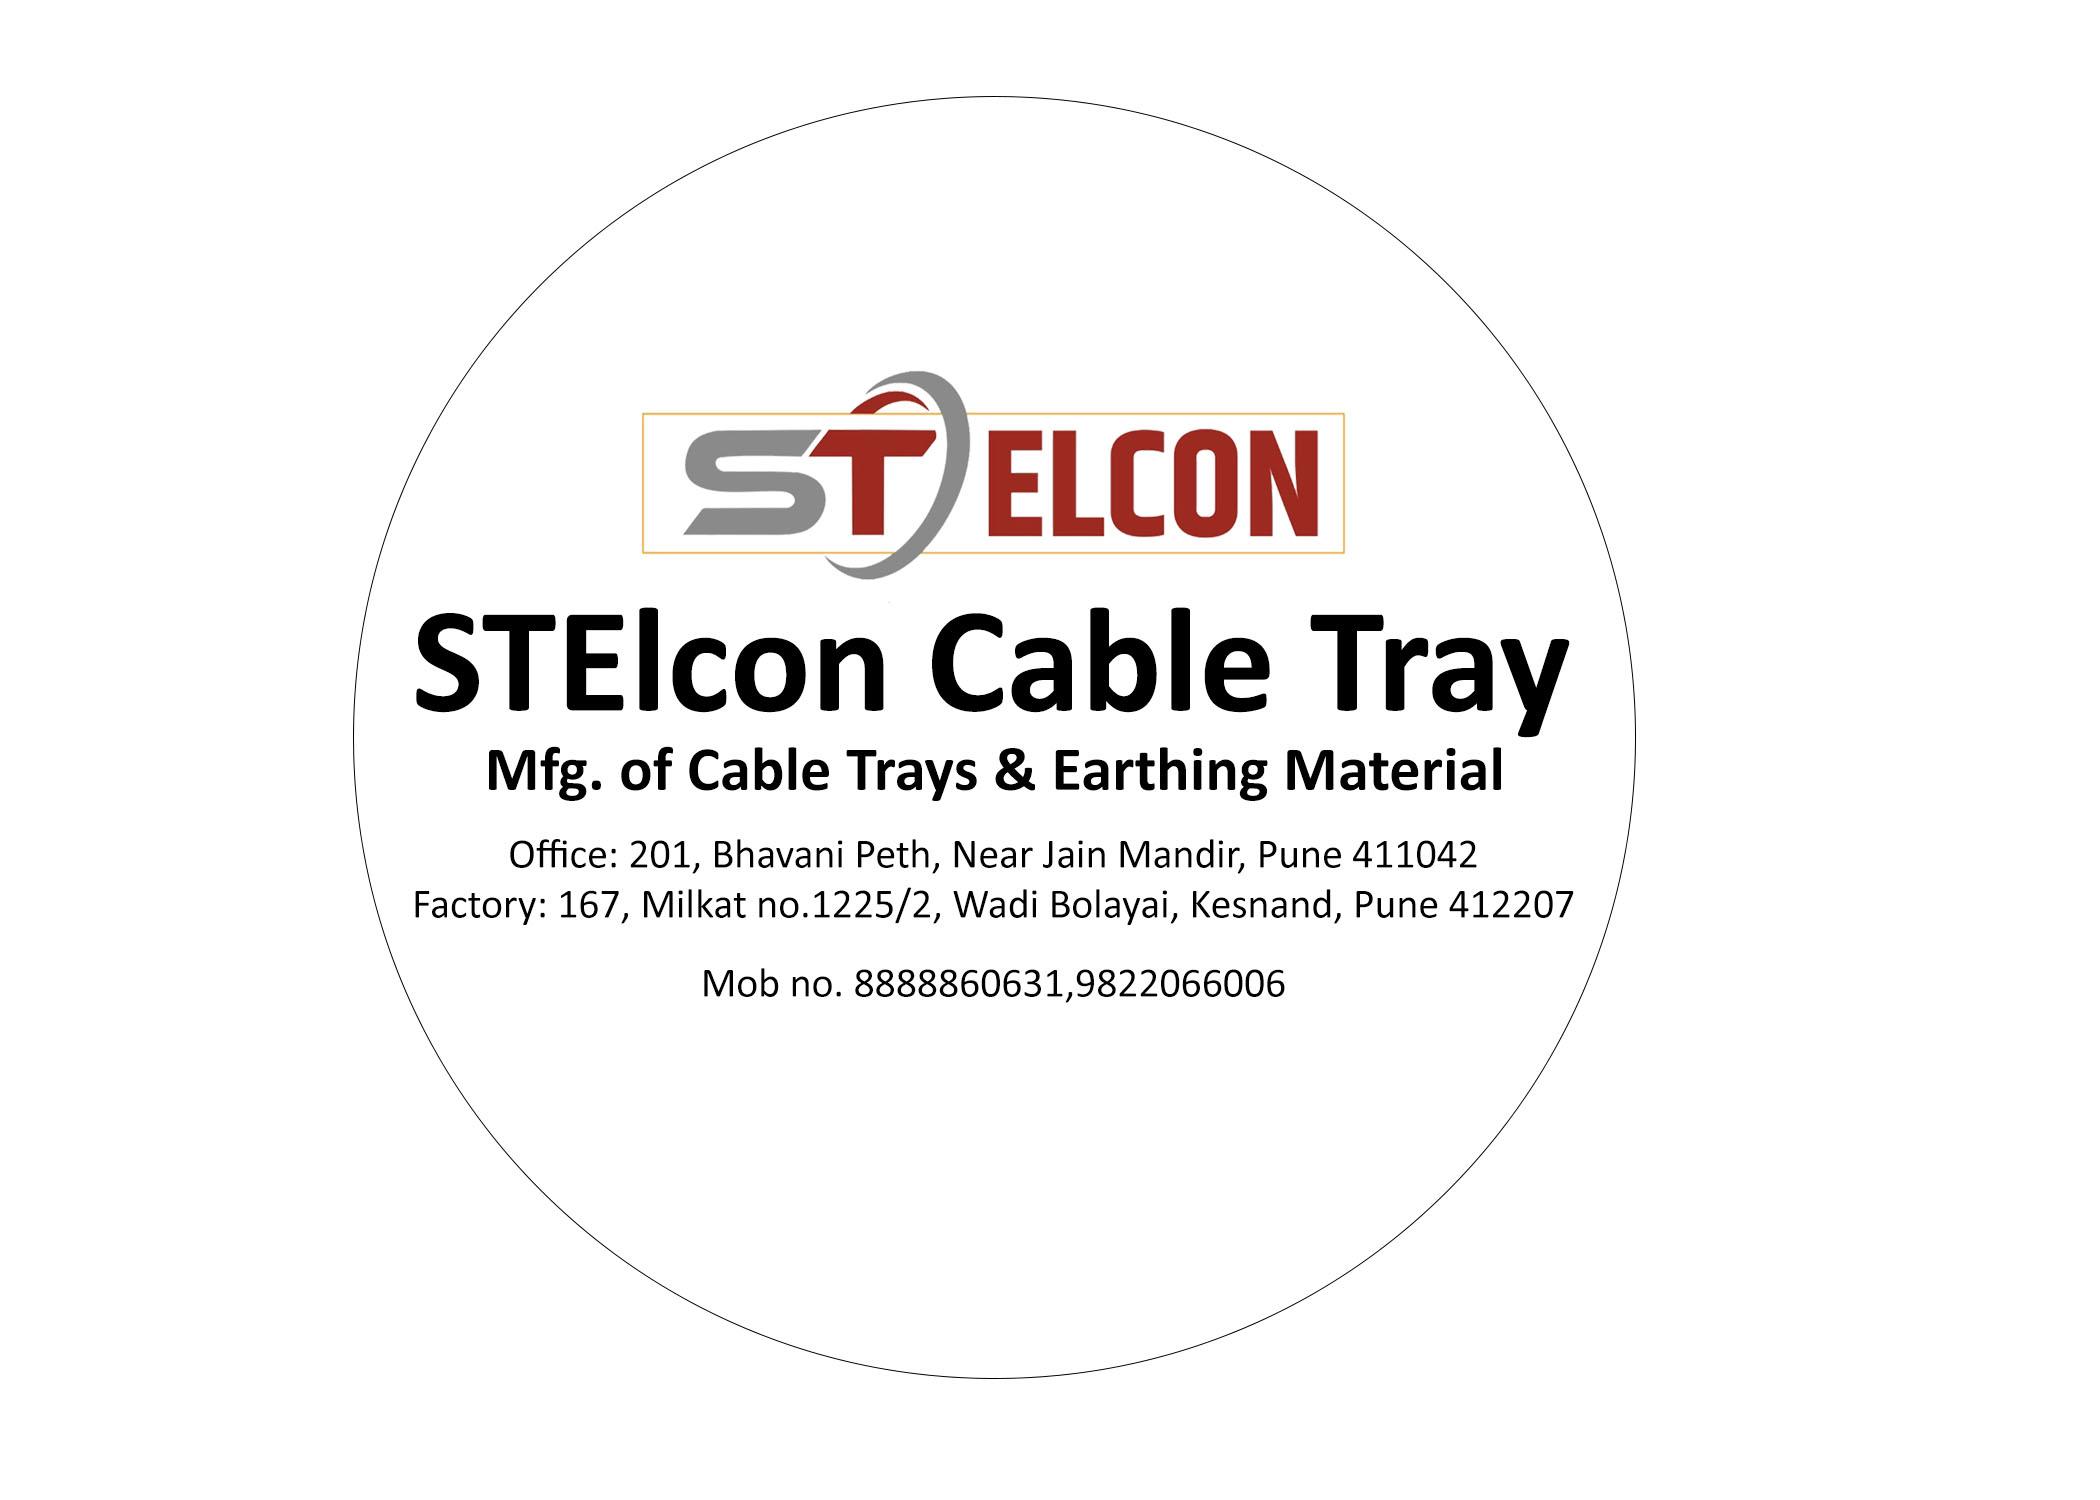 STELCON CABLE TRAY